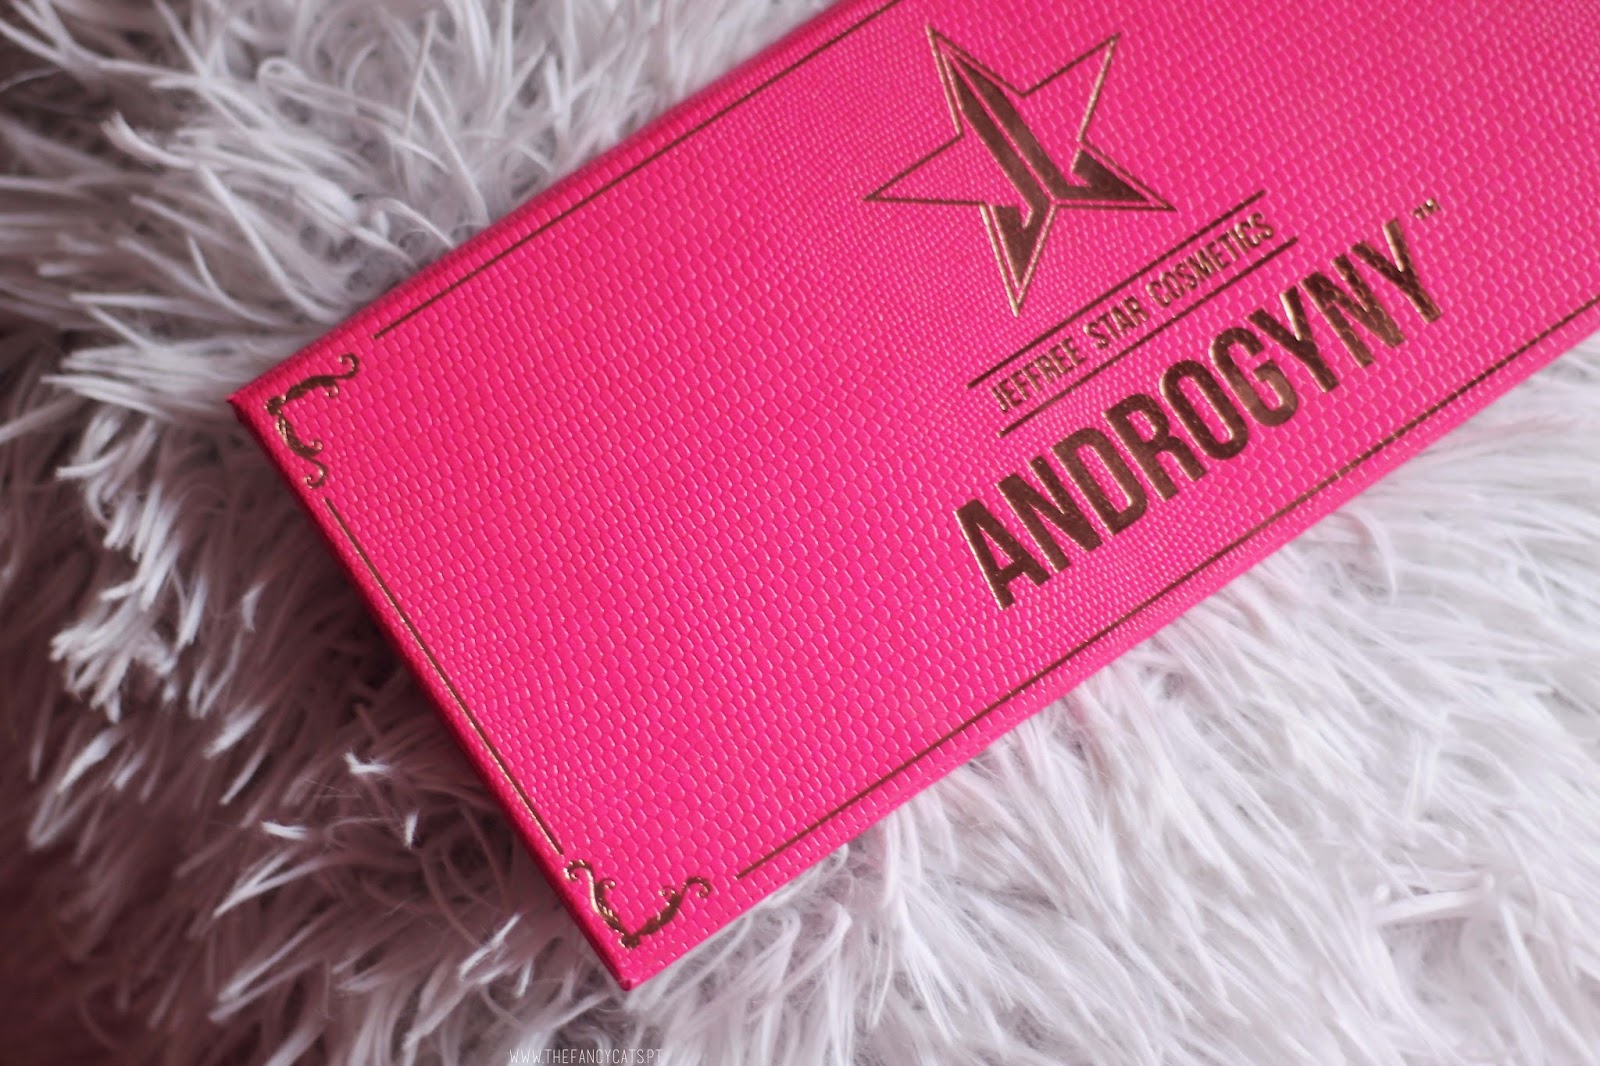 I have this palette since July and it has become one of my favorites. Although most of the shades seem to be completely out of my typical neutrals, I use it quite regularly. In this post I'll show you swatches and talk a little about the palette in general. Like all other Jeffree Star Cosmetics products, "Androgyny" is vegan and cruelty-free. Click to see swatches!